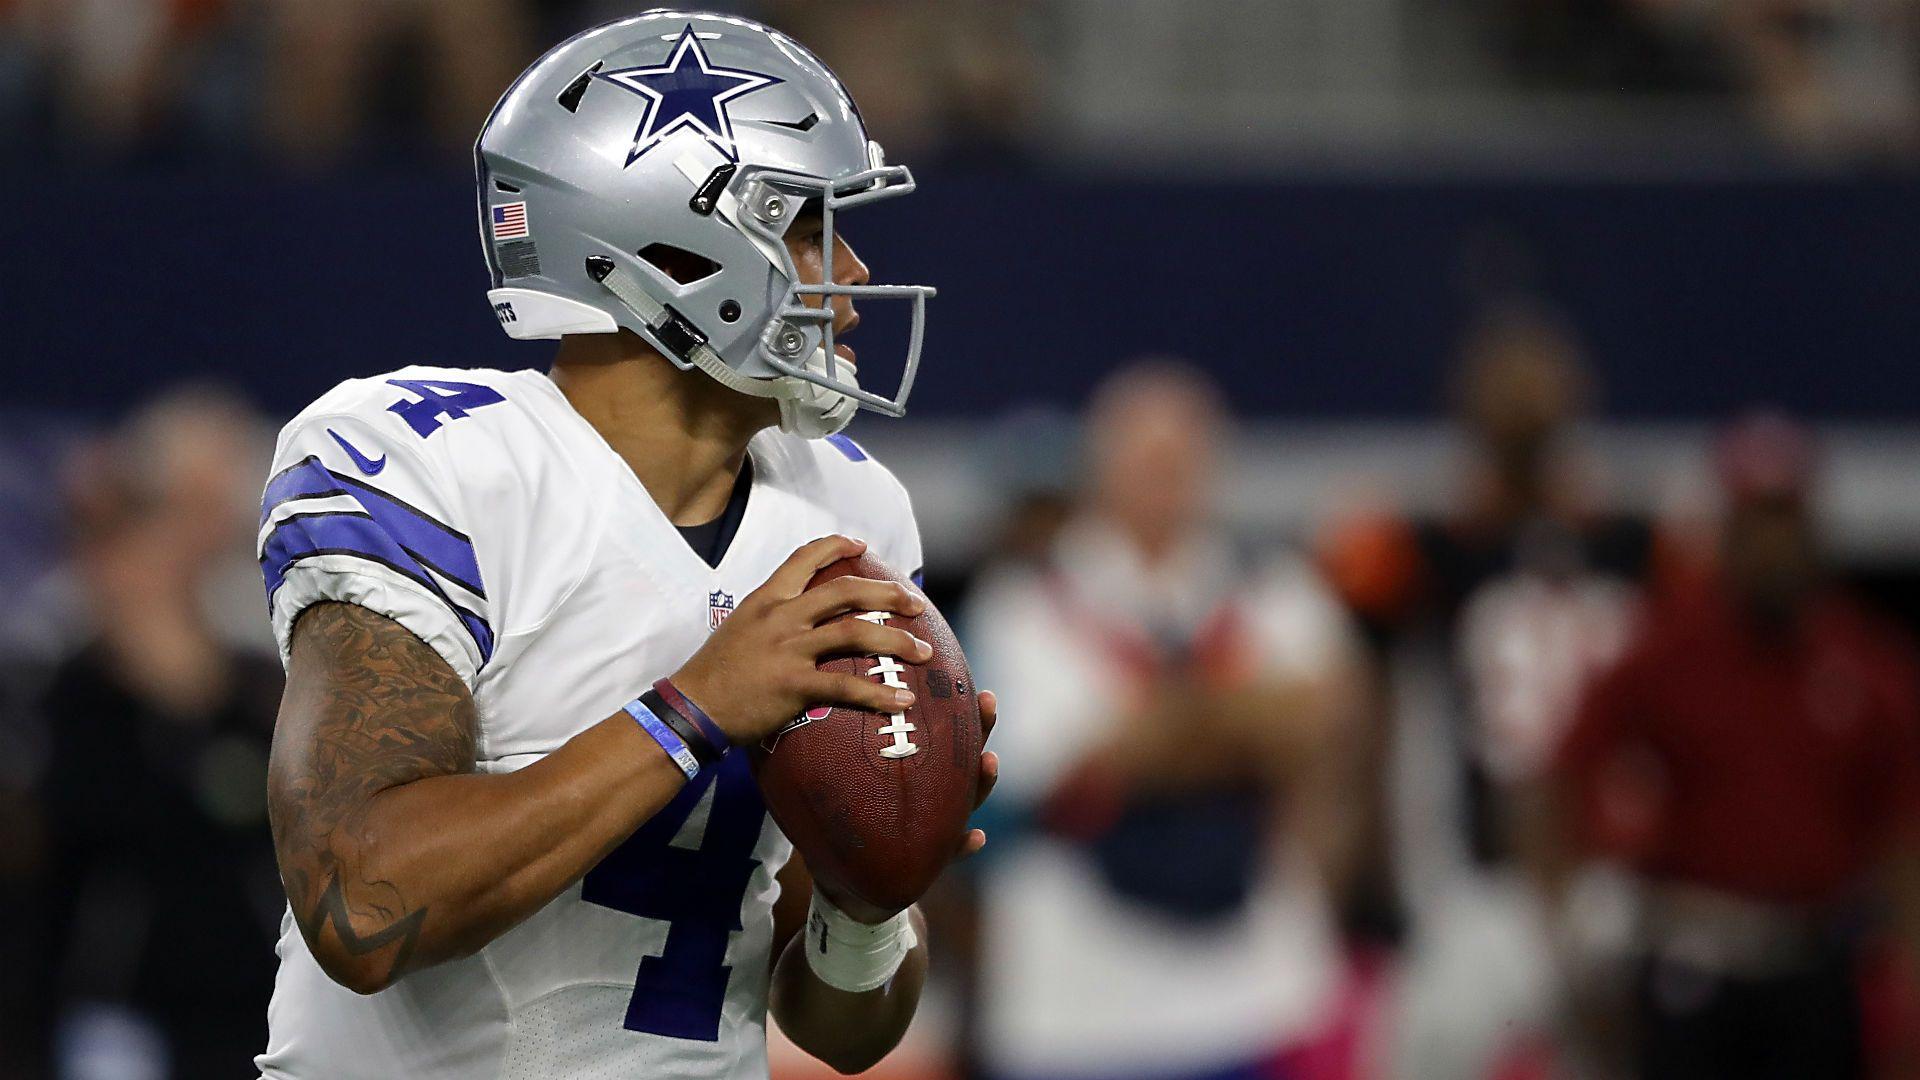 When Romo comes back, no reason for Cowboys to switch from Dak